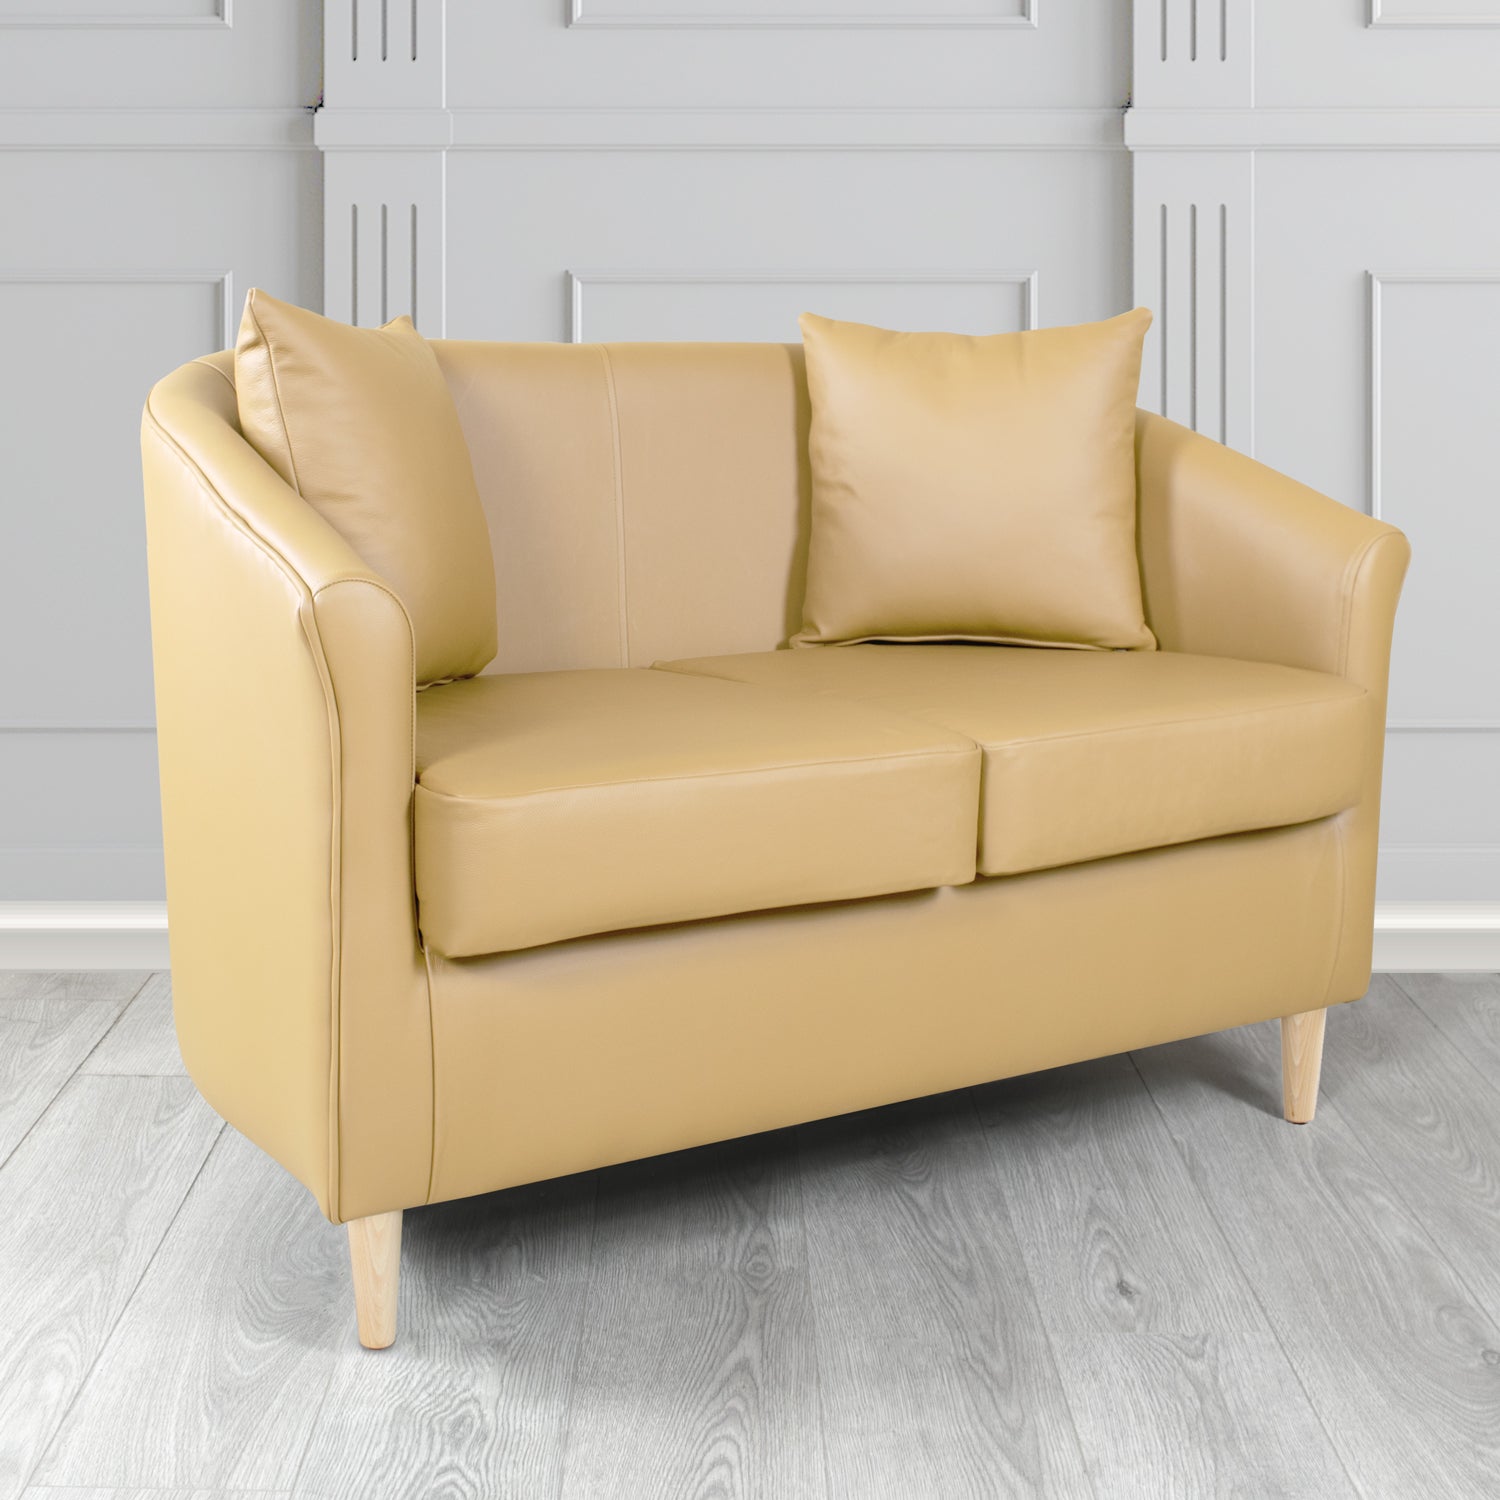 St Tropez Shelly Stone Crib 5 Genuine Leather 2 Seater Tub Sofa with Scatter Cushions - The Tub Chair Shop